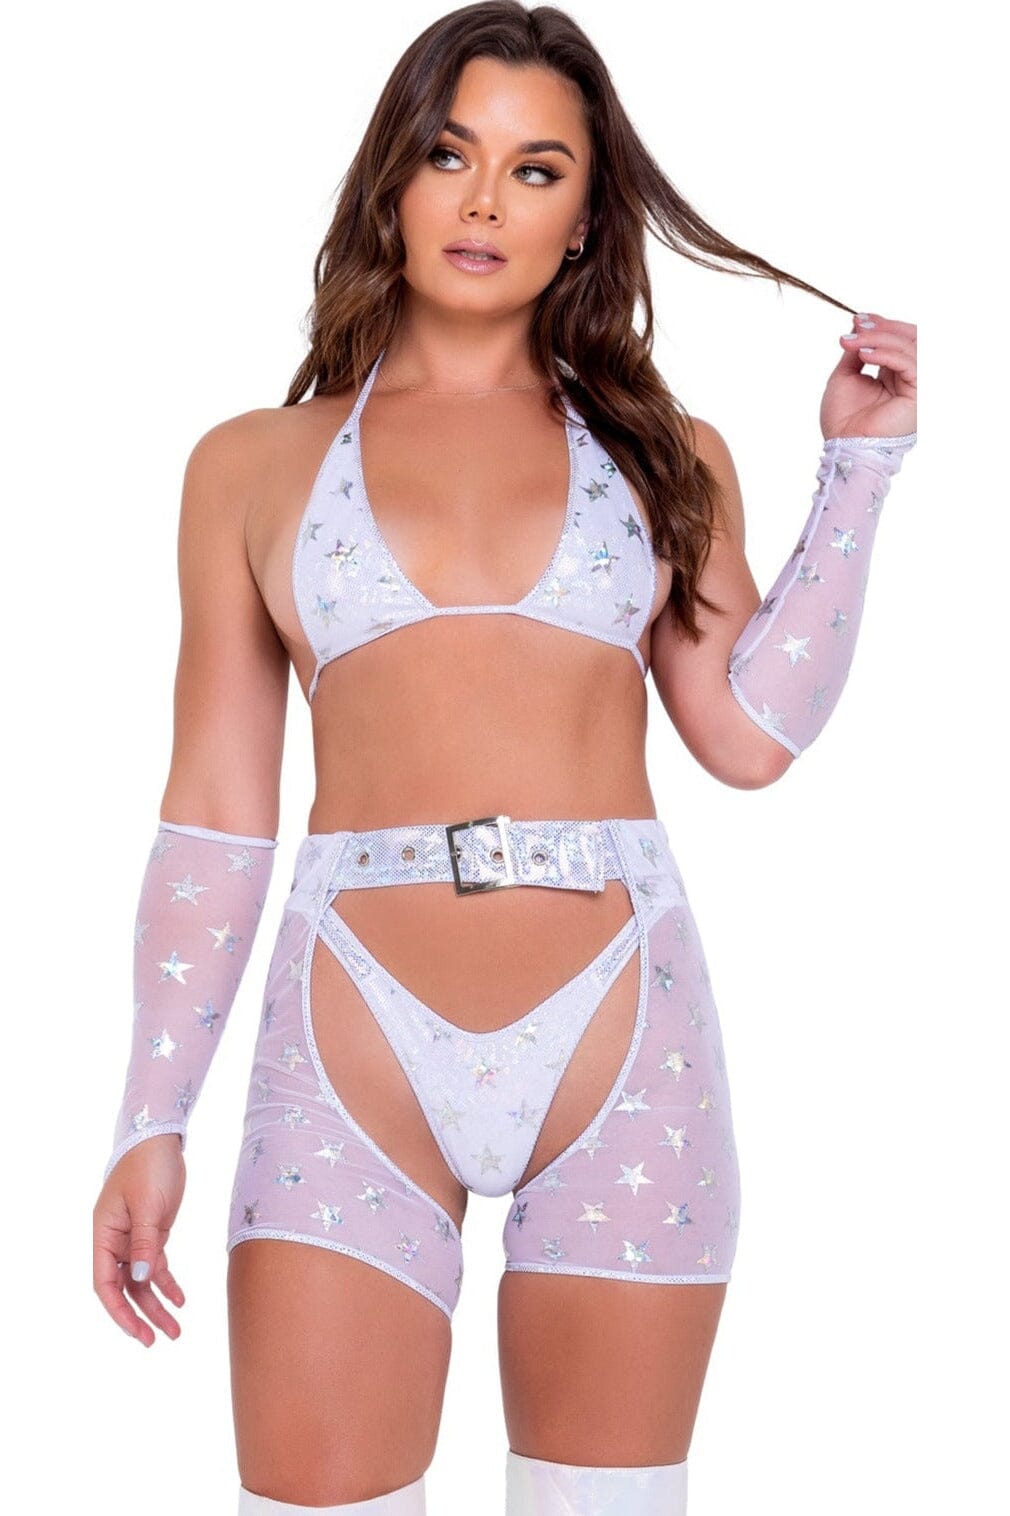 Star Child White Mesh Chaps with Belt-Chaps-Roma Dancewear-White-L-SEXYSHOES.COM